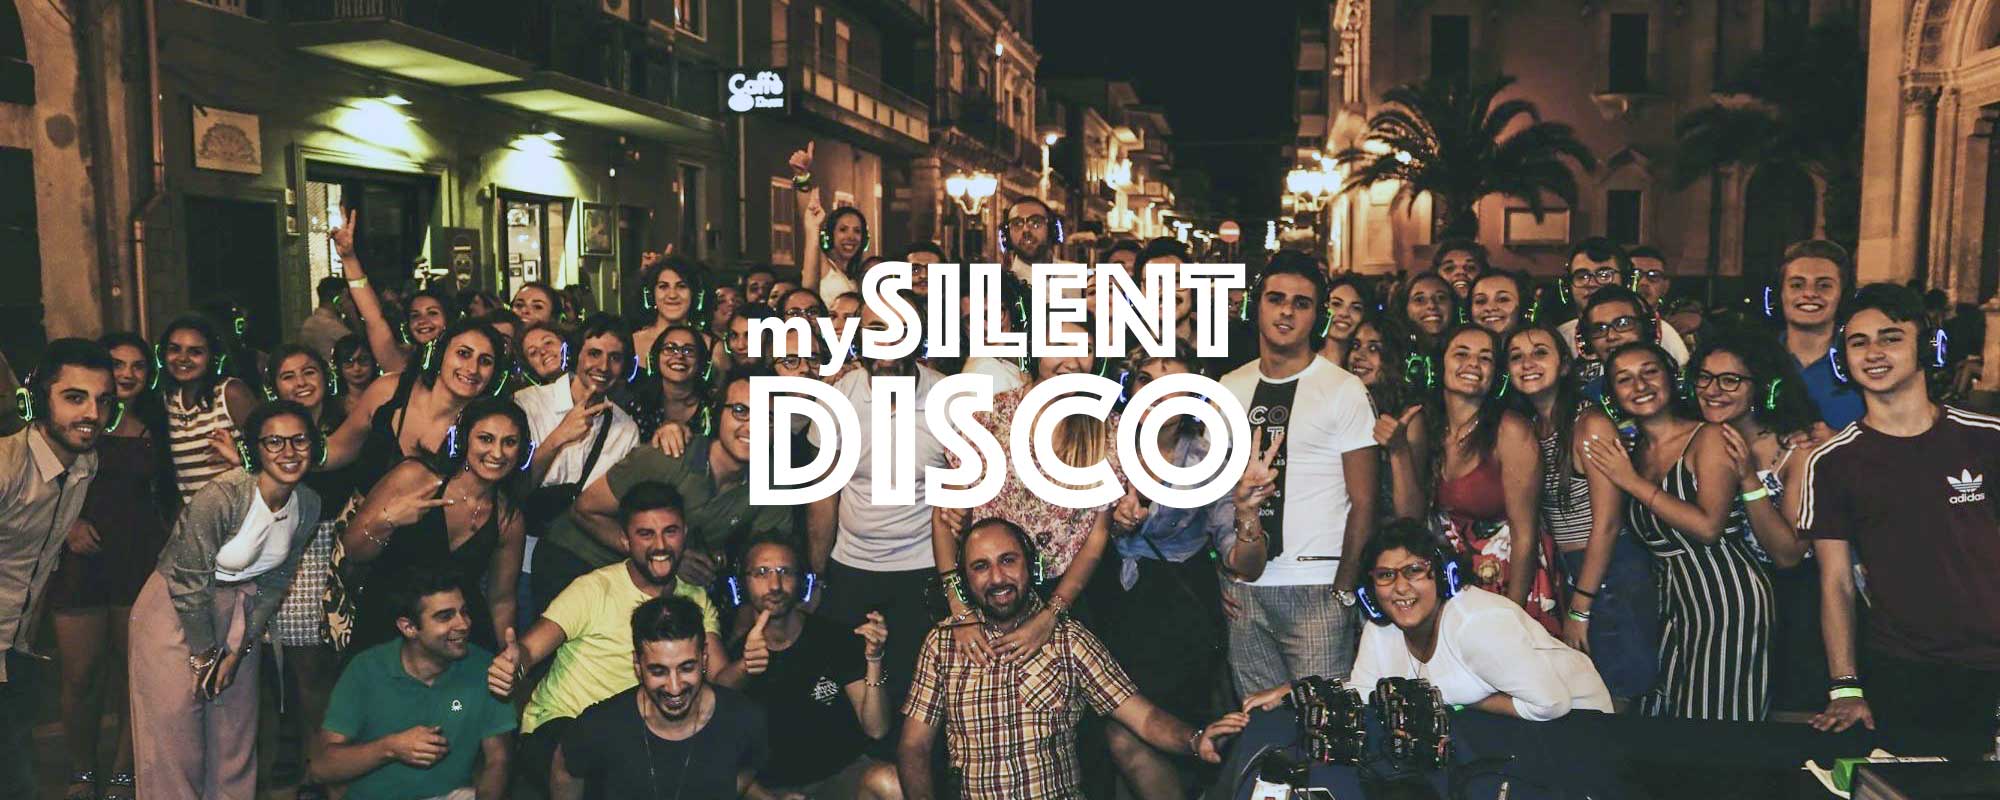 Outdoor silent disco event in Italy